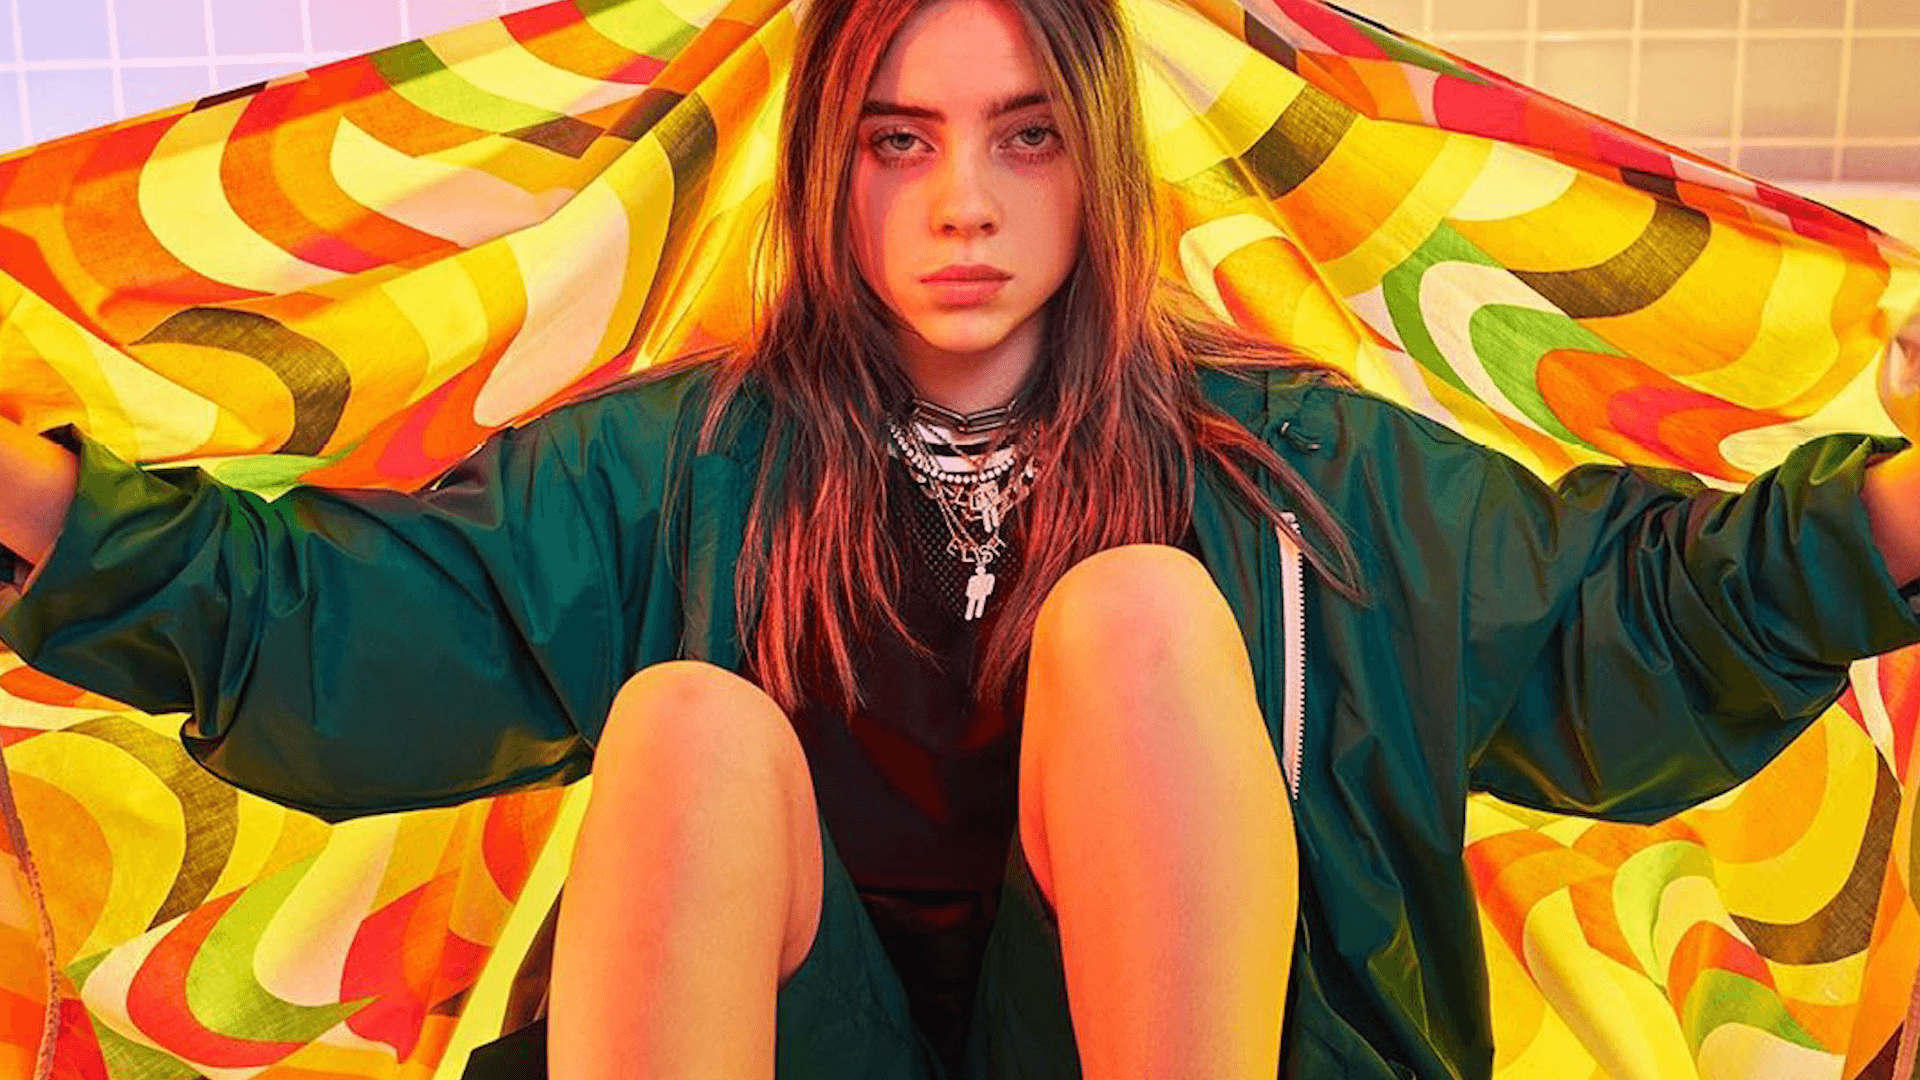 Billie Eilish Revealed Why She Wears Baggy Clothes in Calvin